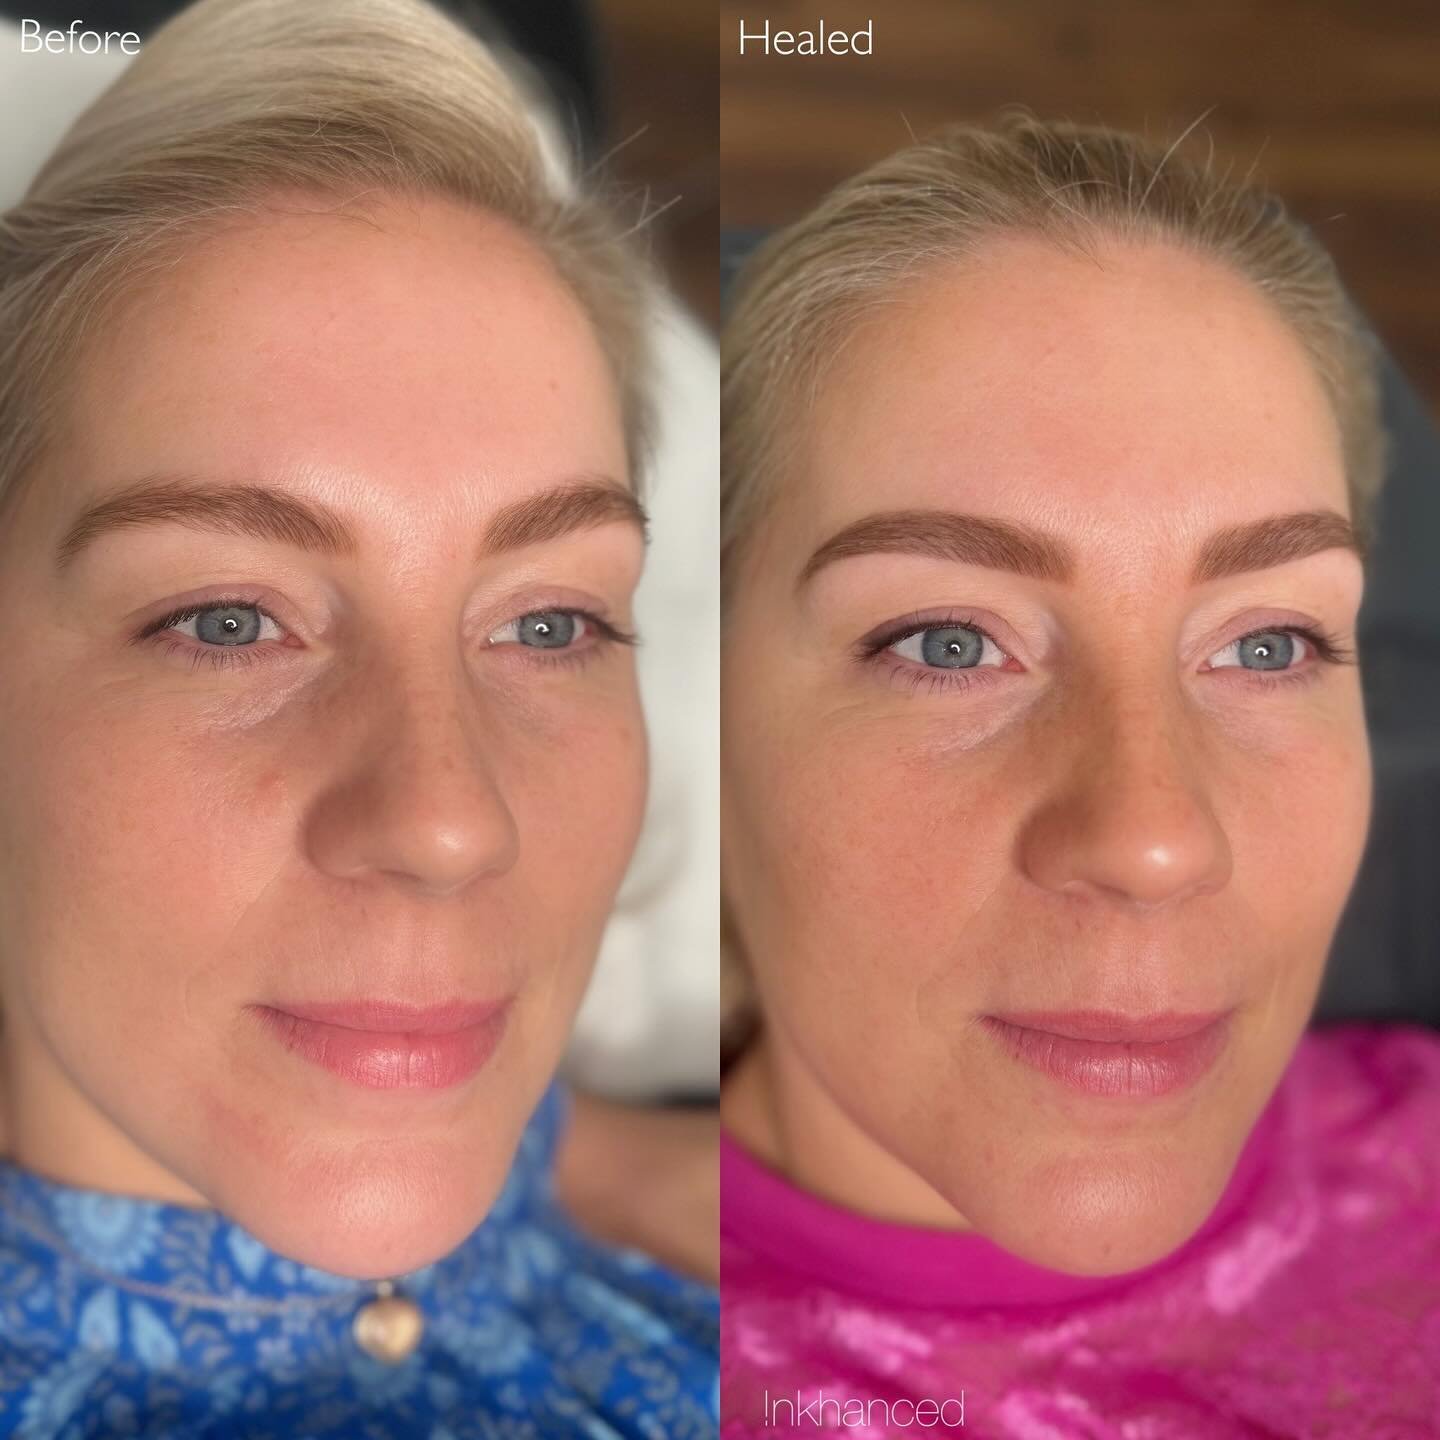 Before + Healed 
Ombr&eacute; Powder Brows &amp; Smokey liner

🤍Swipe for close up&rsquo;s of the fresh tattoo&rsquo;s 🔍

Immediately after the tattoo the area will appear darker, sharper &amp; slightly swollen. 
Most of the noticeable changes in h